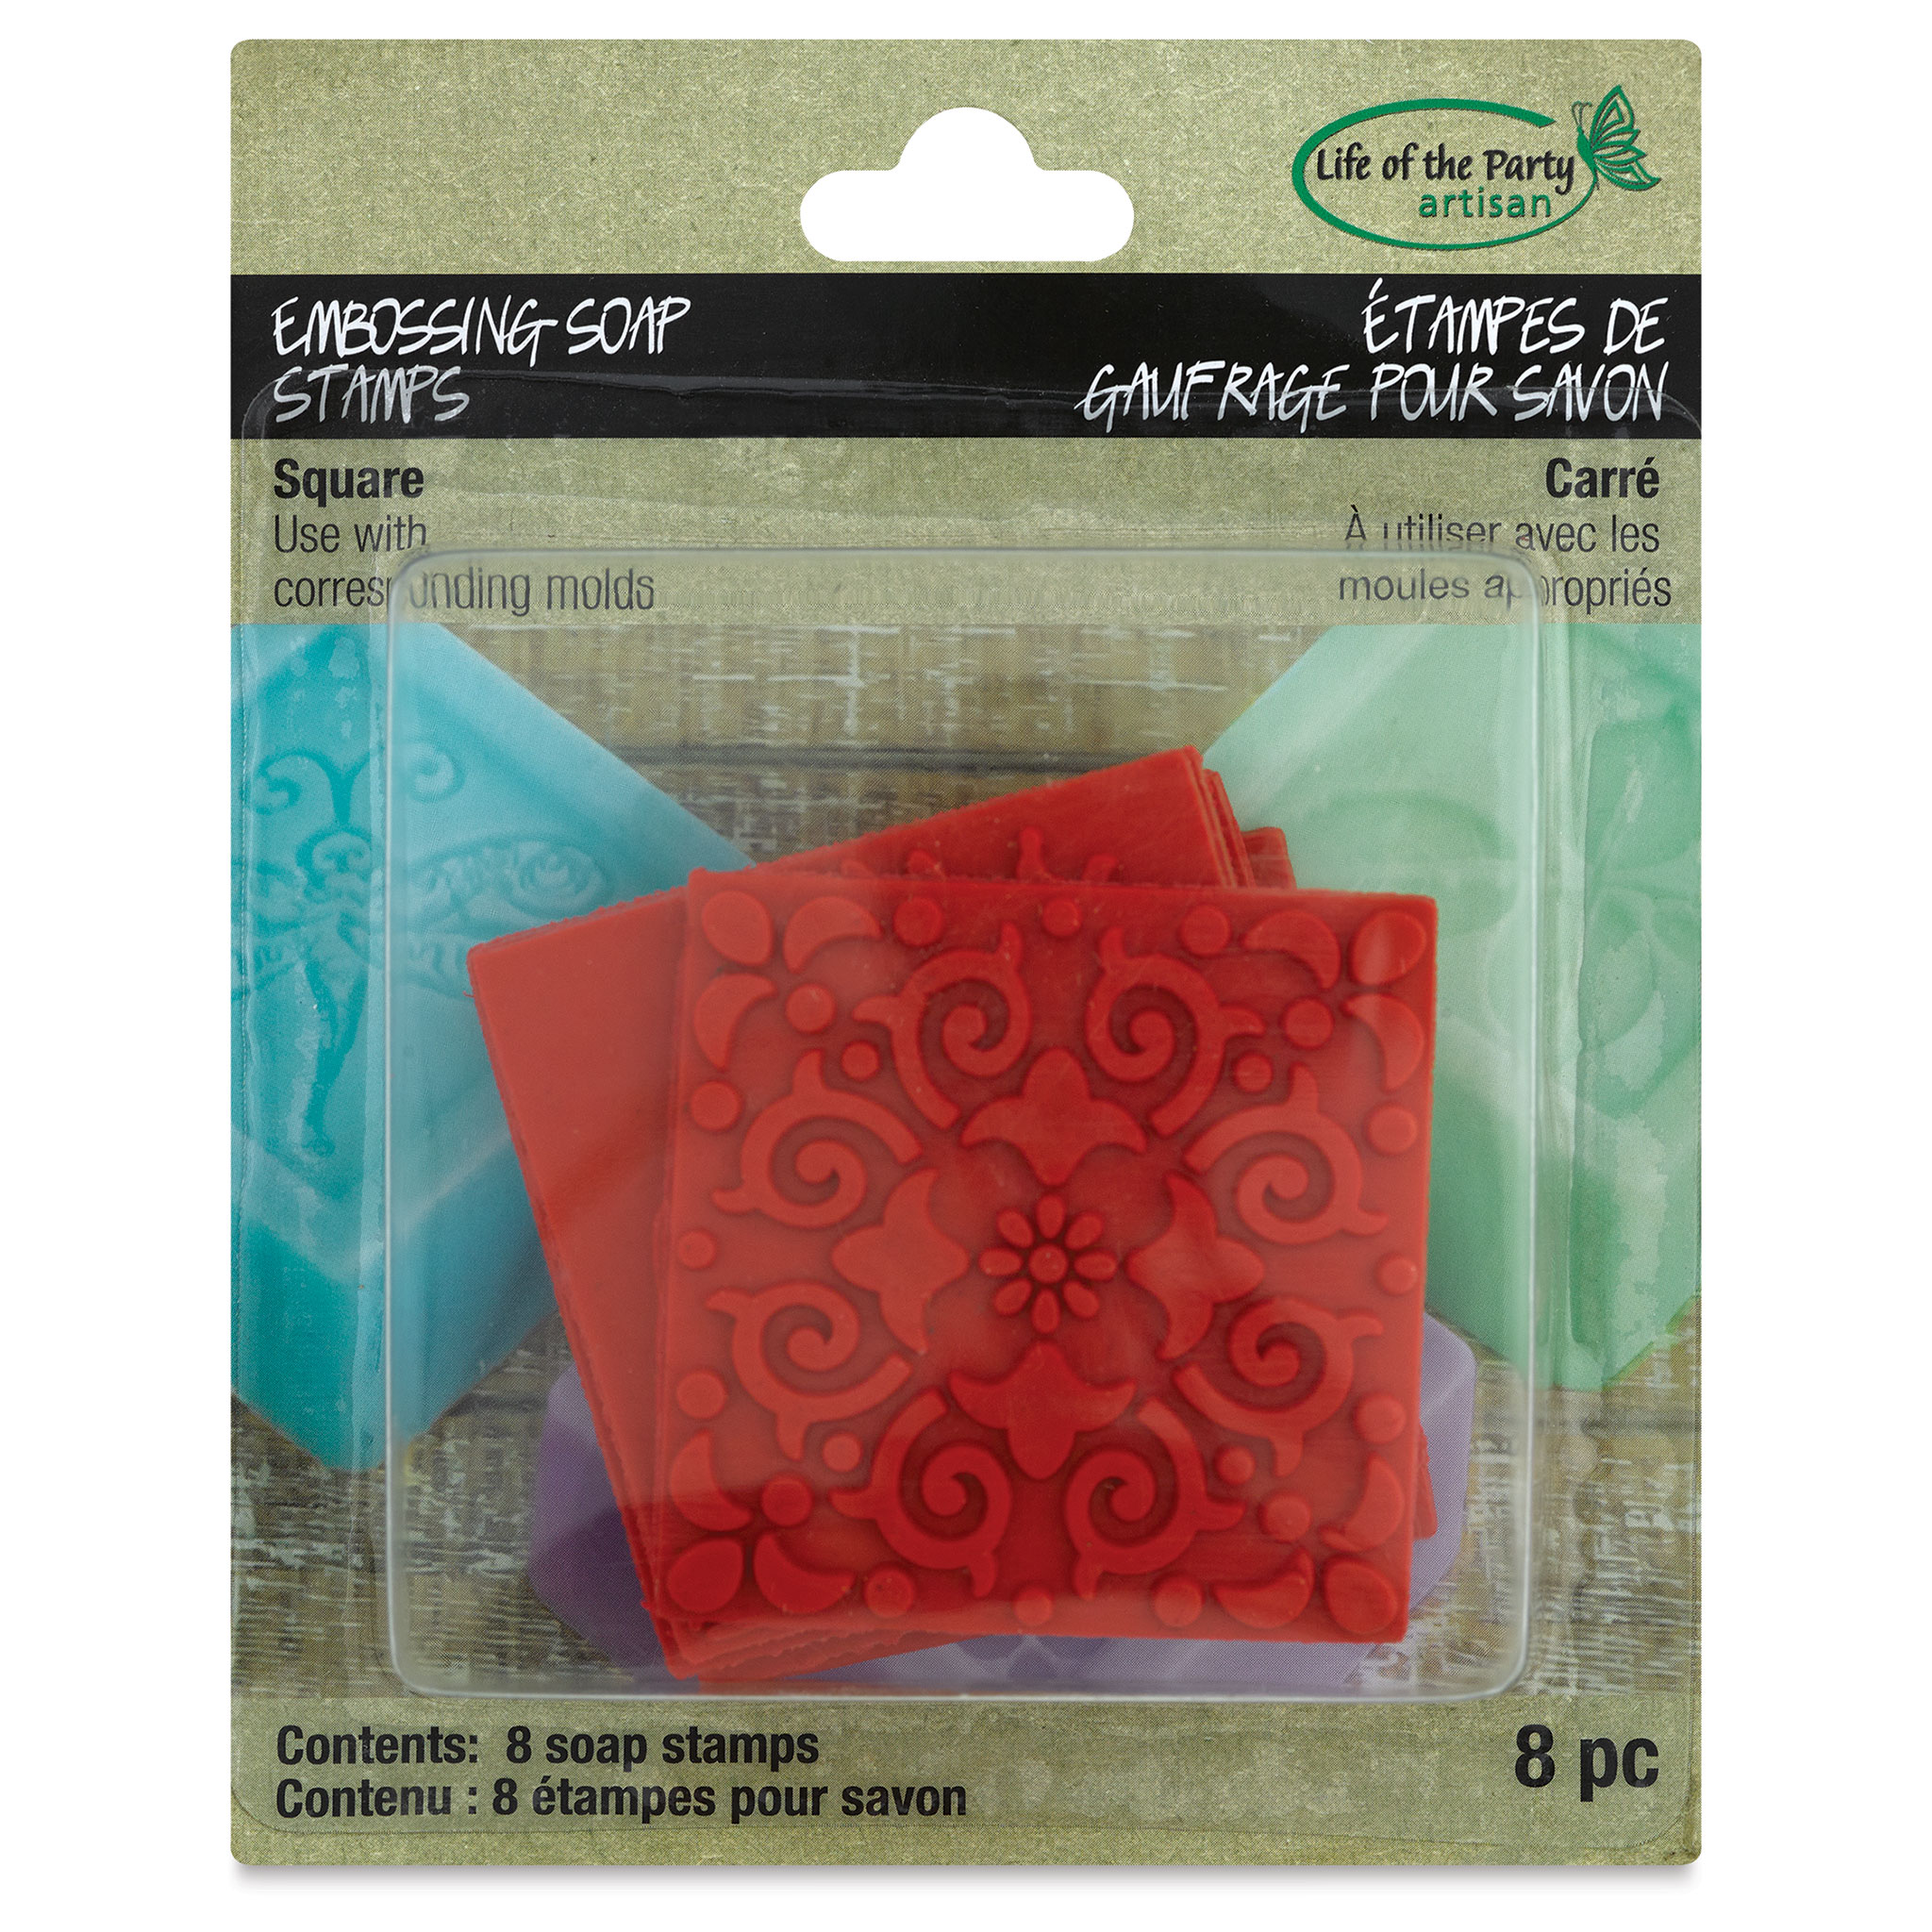 Life of the Party Embossing Soap Stamps